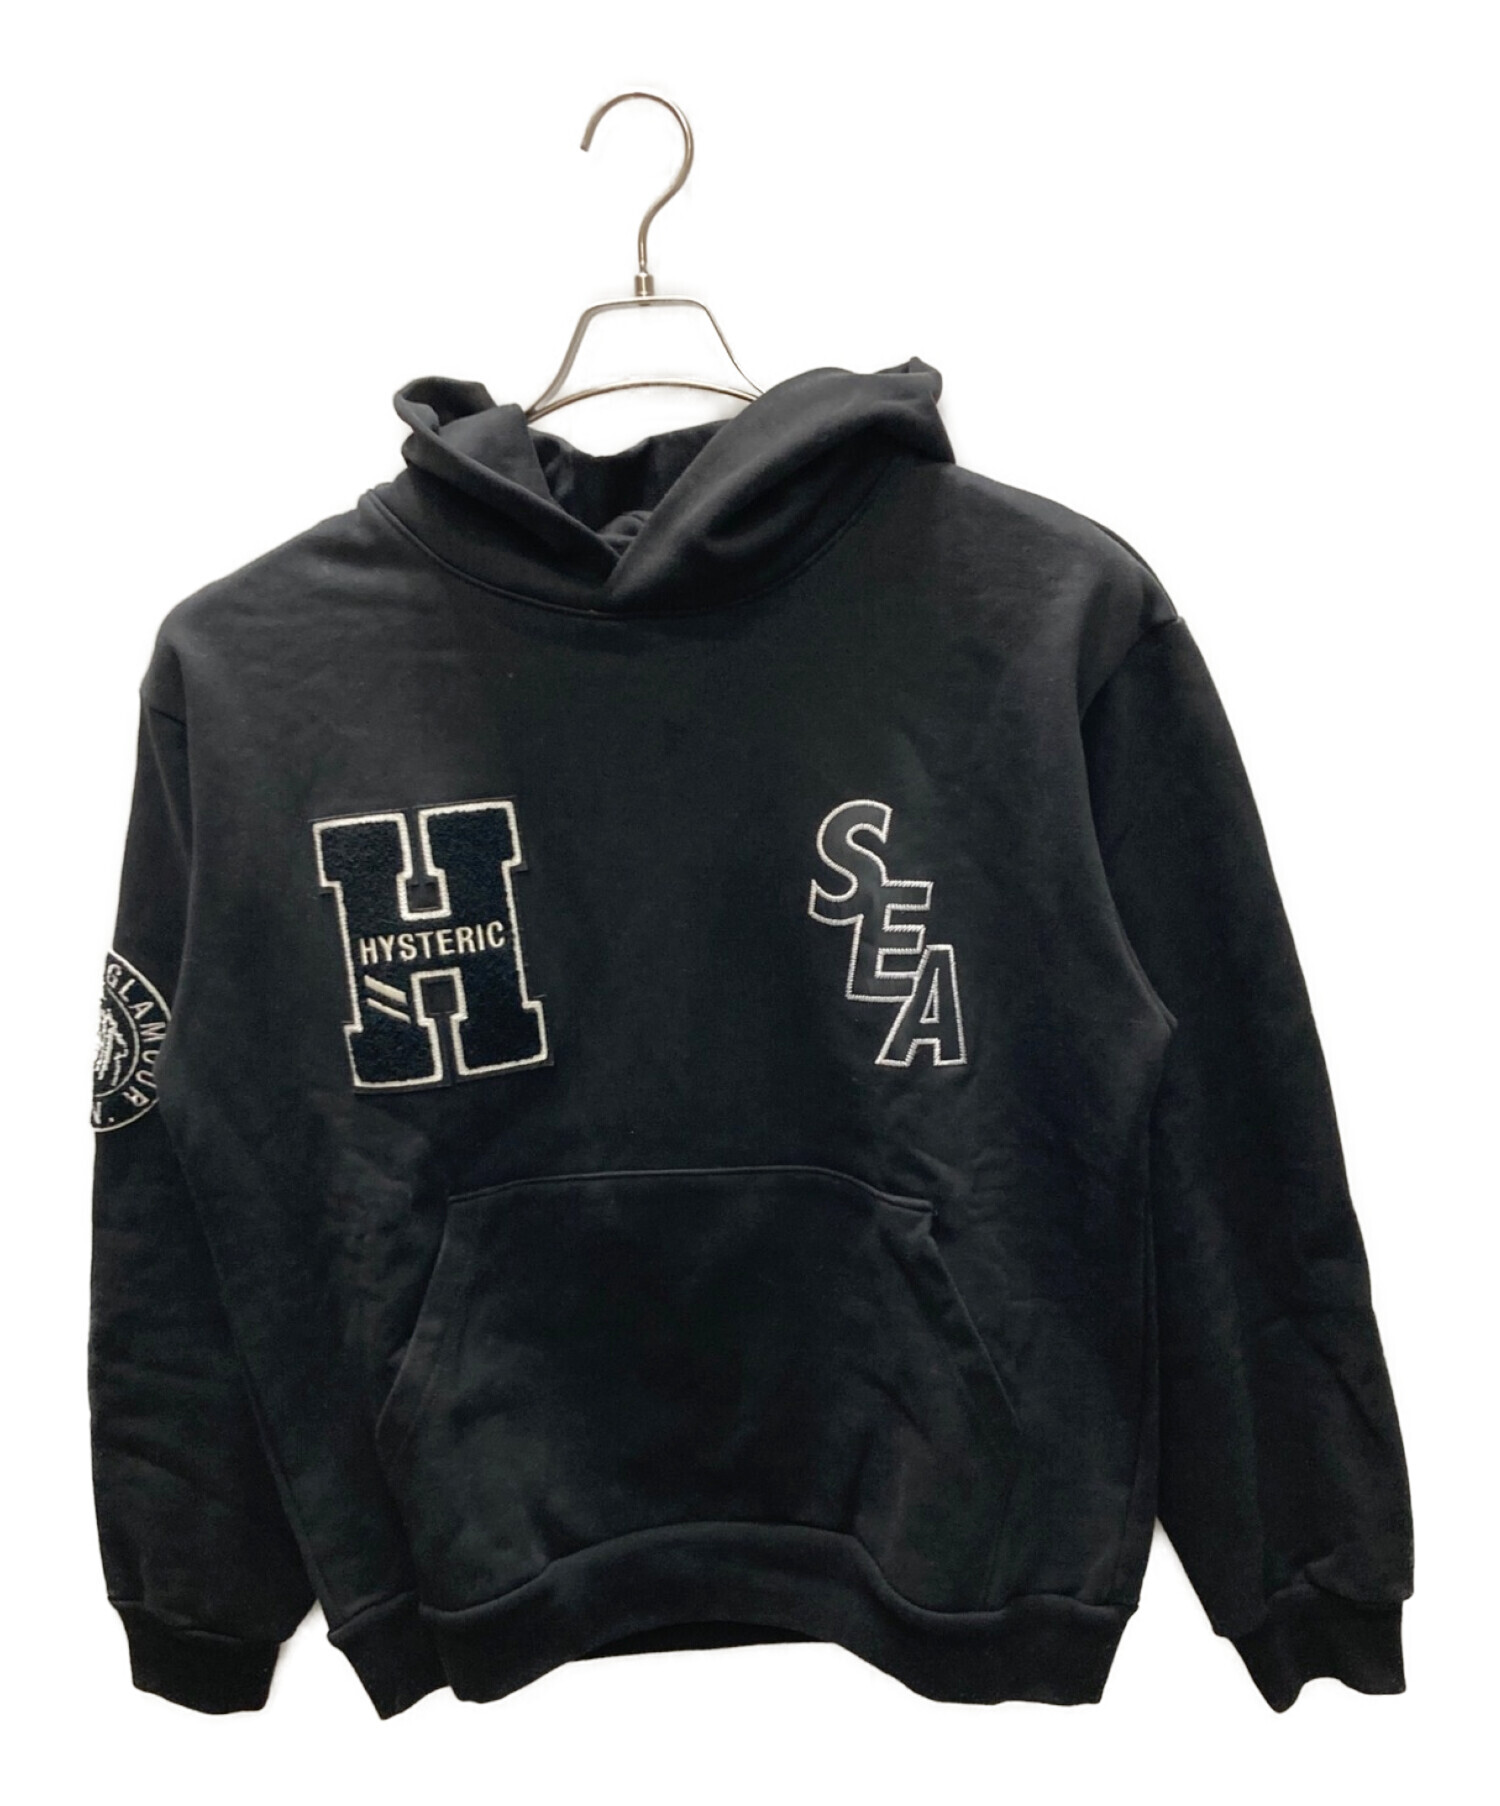 HYSTERIC GLAMOUR × WDS HOODIE BLACK Lサイズトップス - パーカー